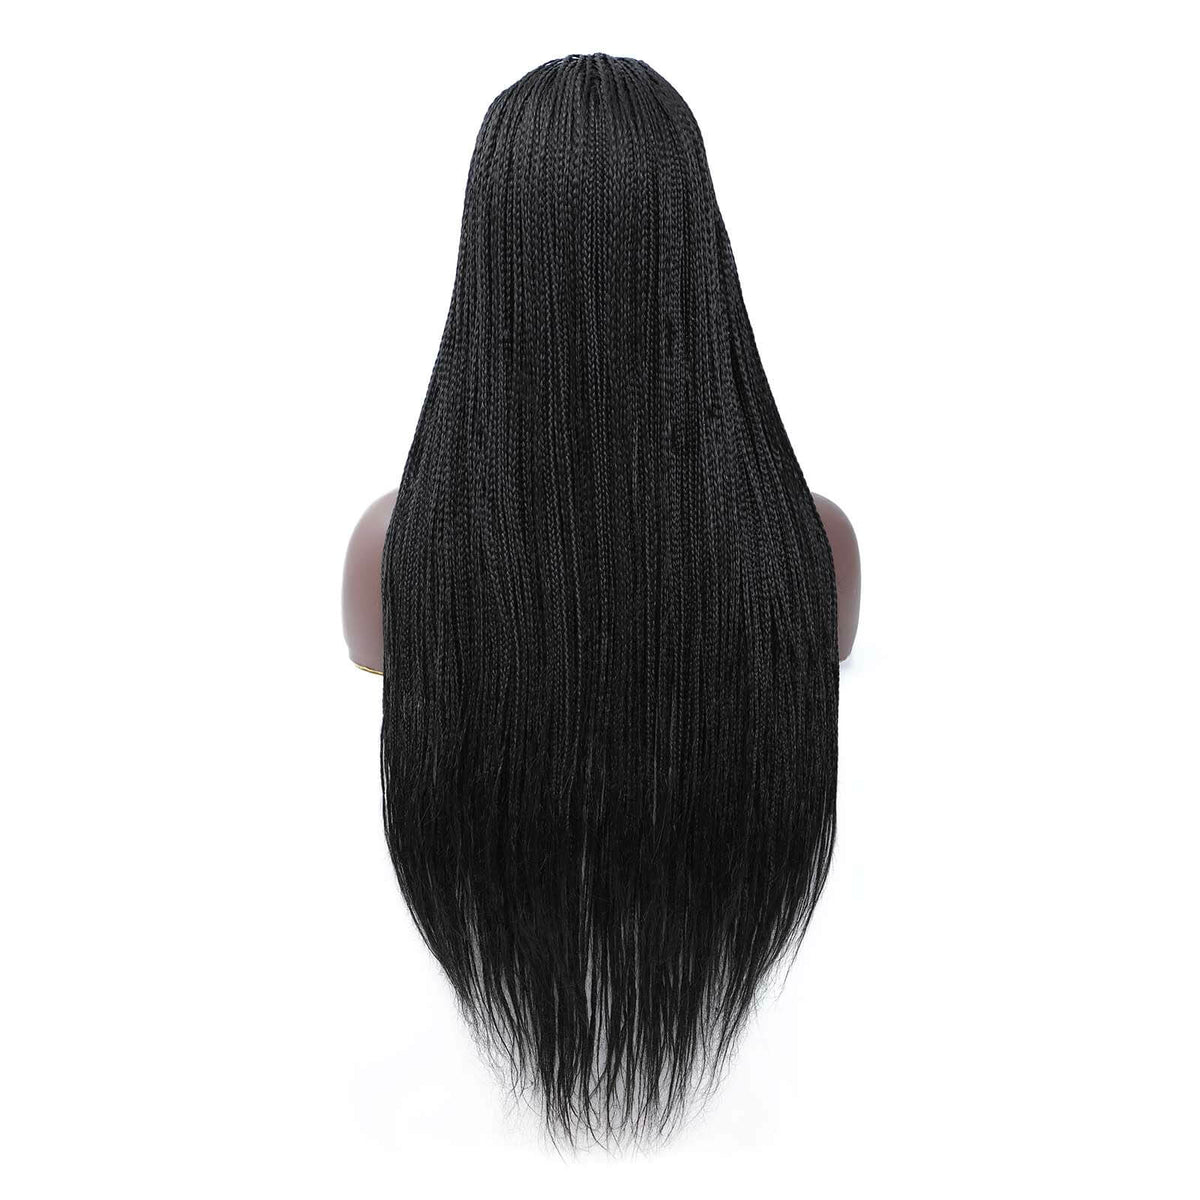 Back of Box Braided Lace Front Wigs for Black Women Black Color Long Wig